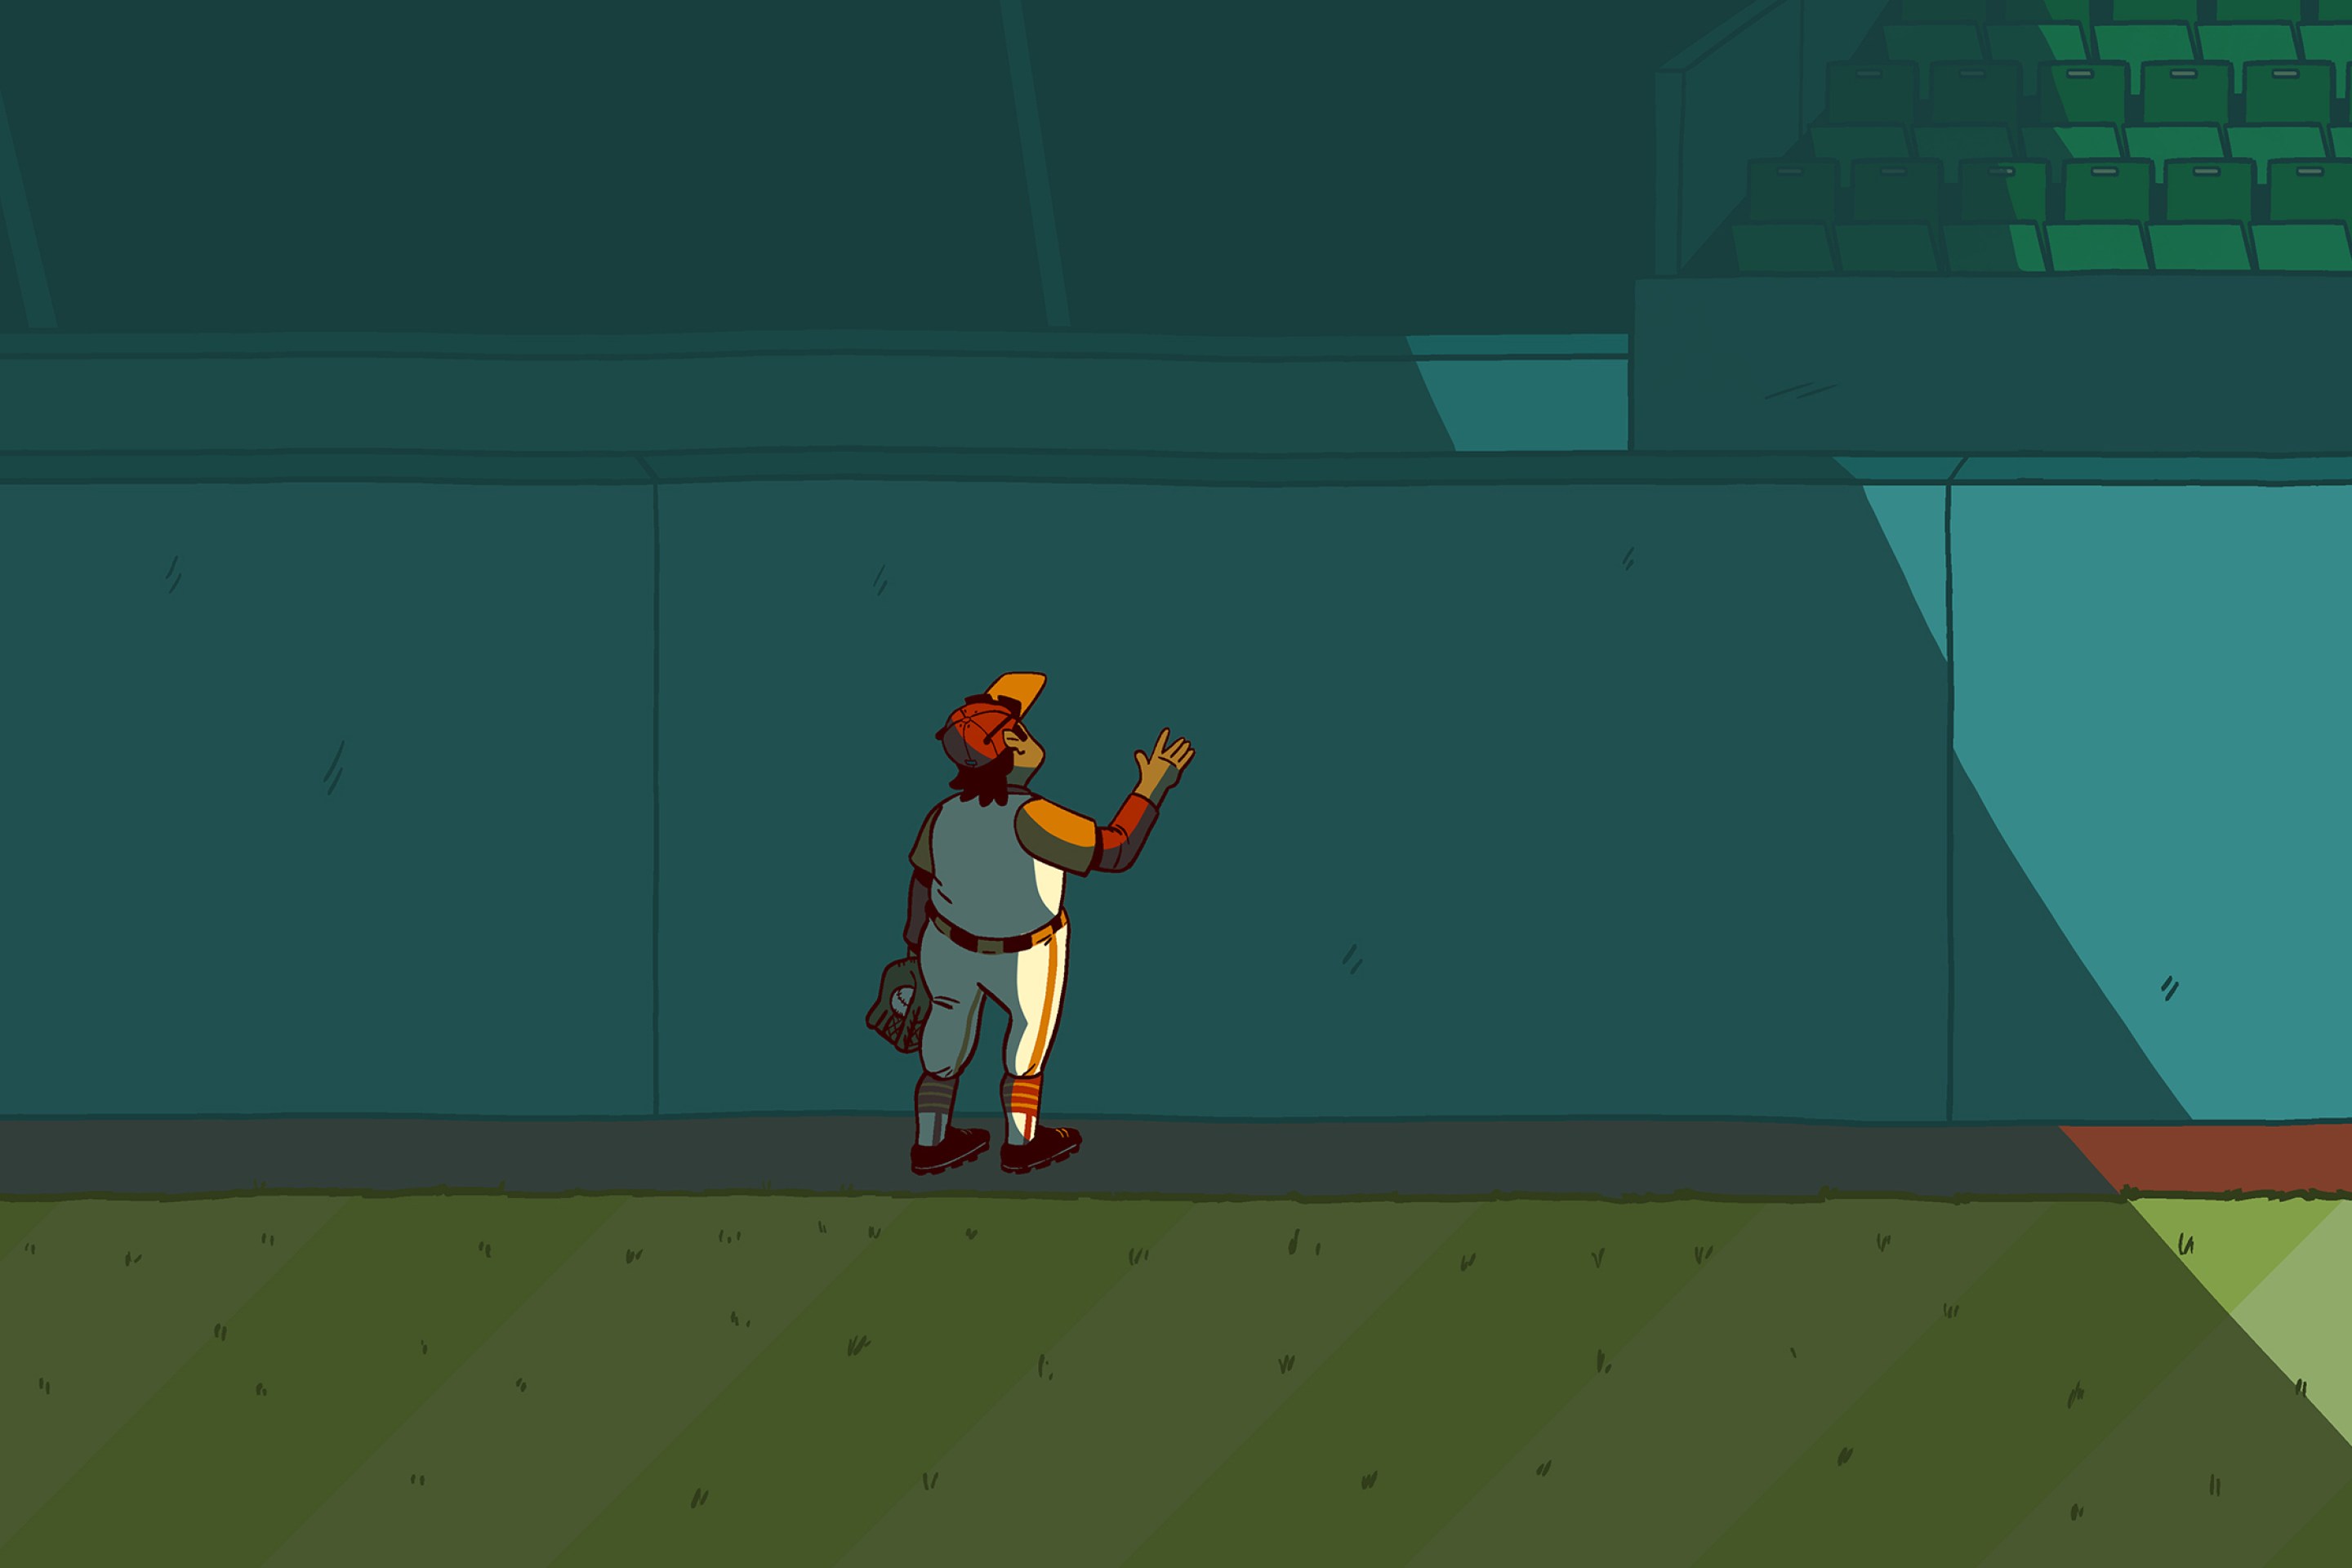 A cartoon of an outfield wall with an encroaching shadow over the player standing looking at it. It feels dark and desolate. The baseball stadium is empty.